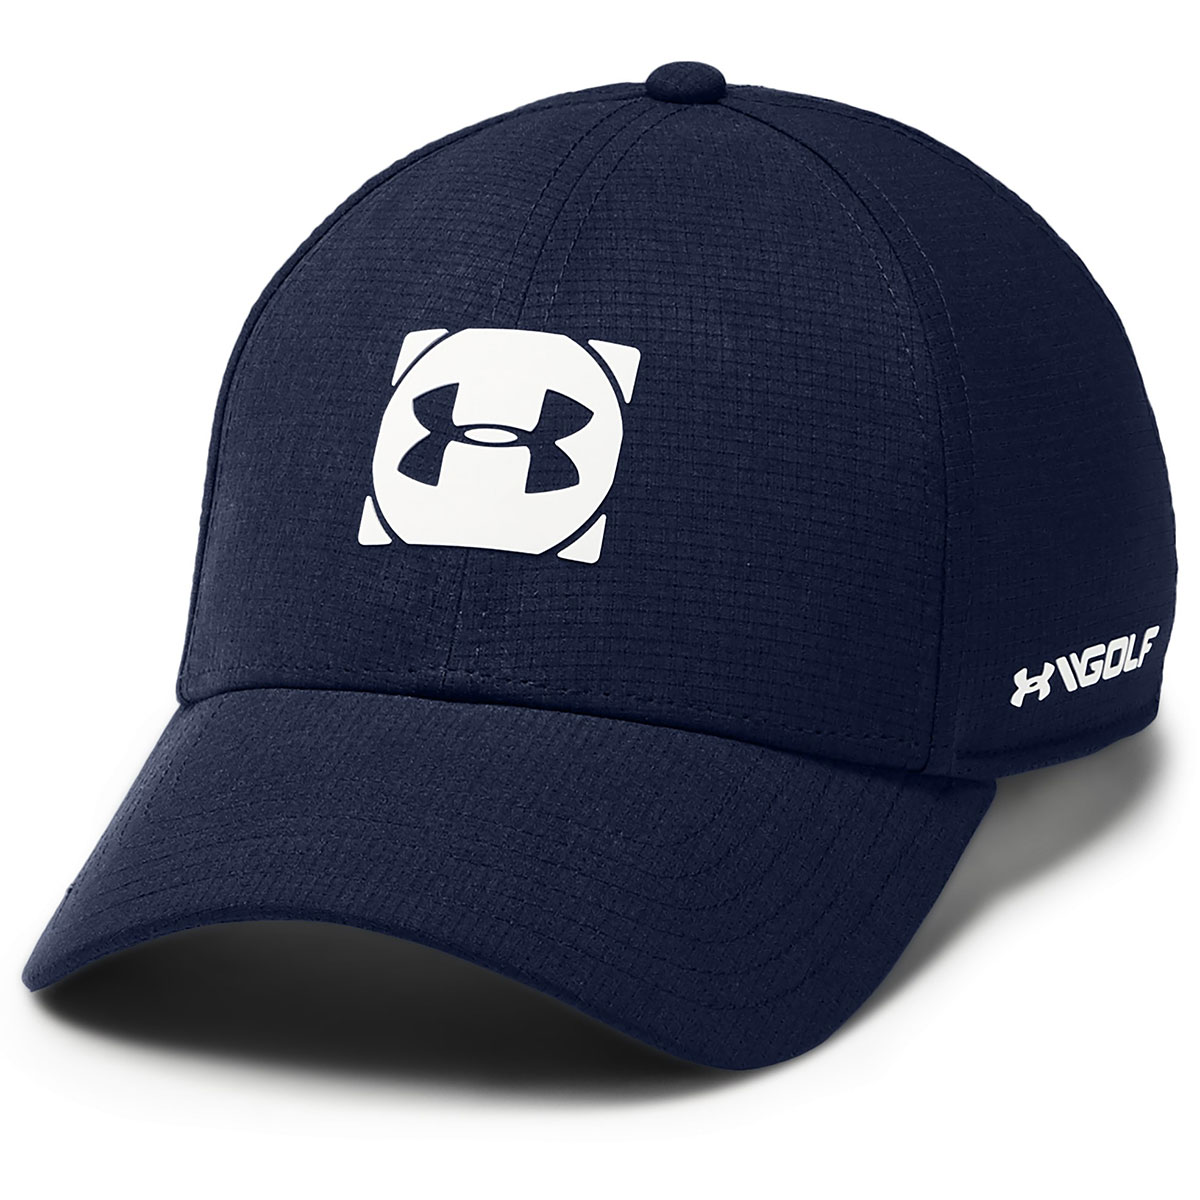 Under Armour Official Tour 3.0 Golf Cap from american golf